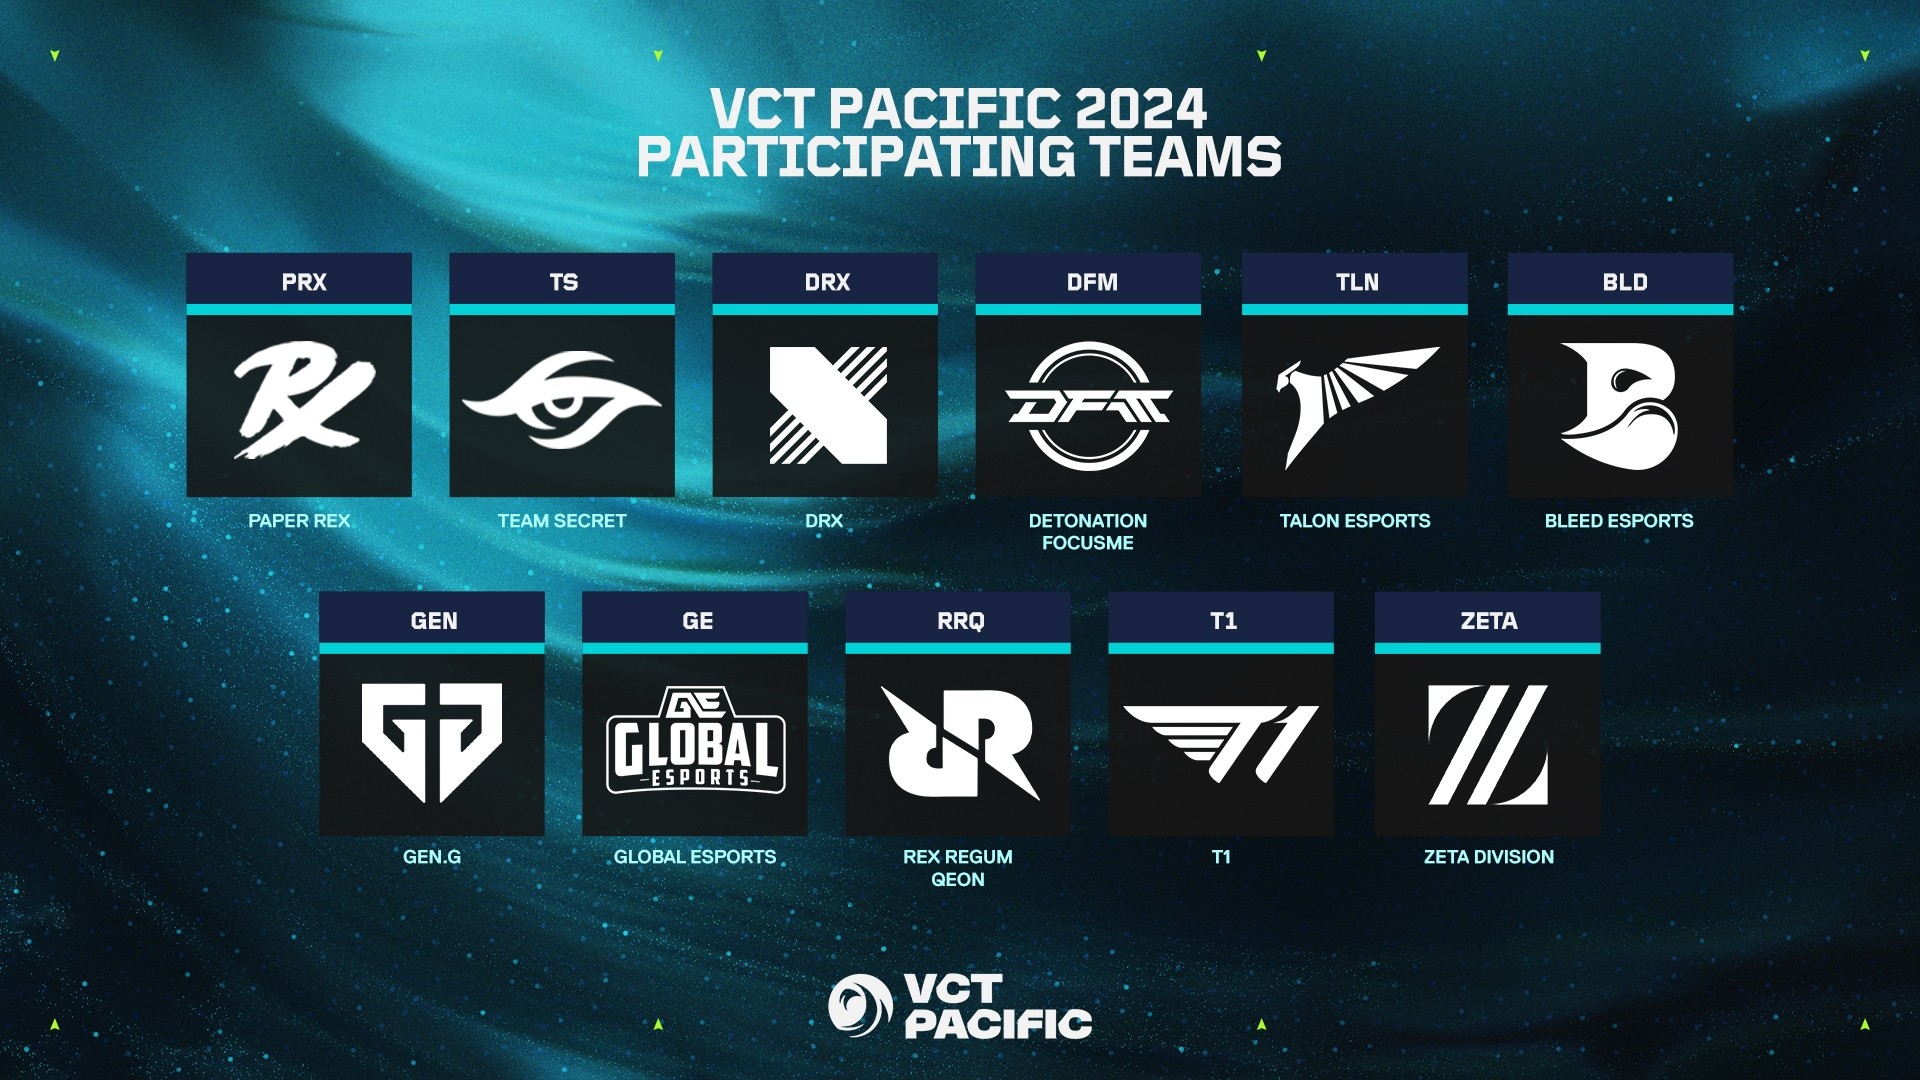 VCT Pacific 2024 teams